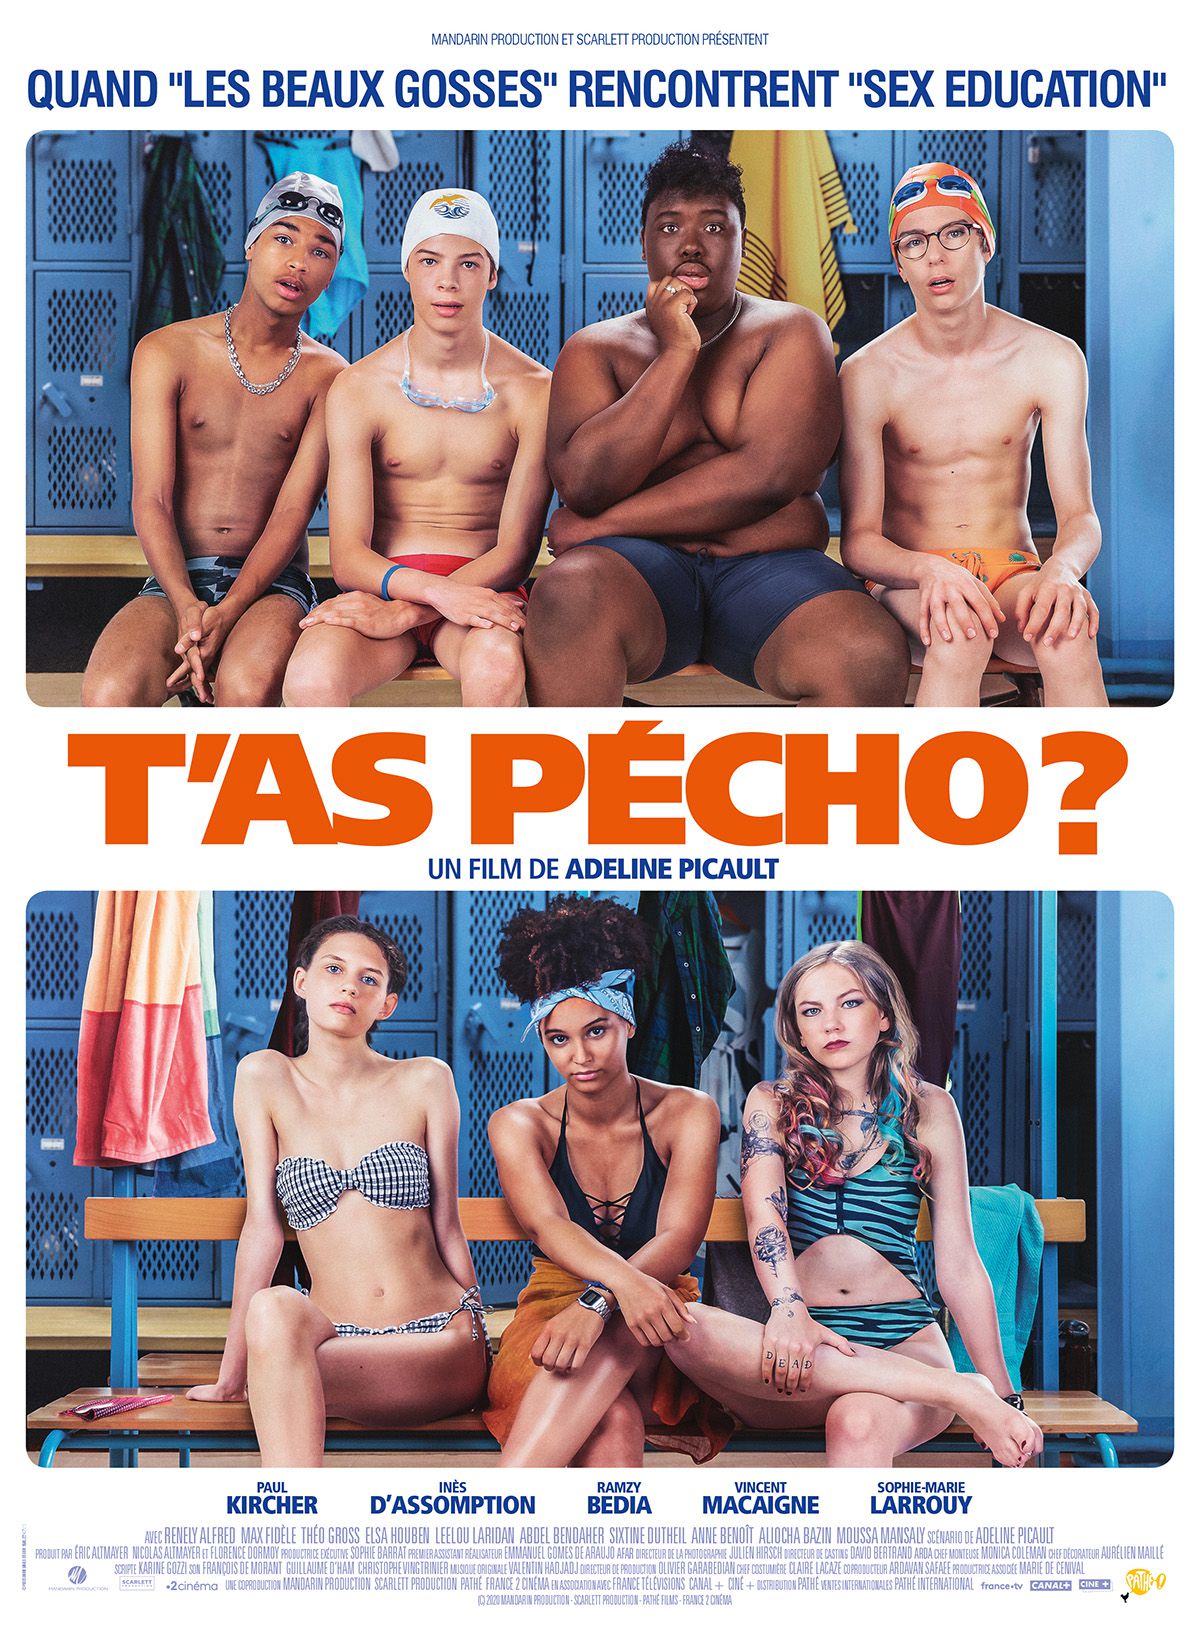 T'as pécho ? - Film (2020) streaming VF gratuit complet